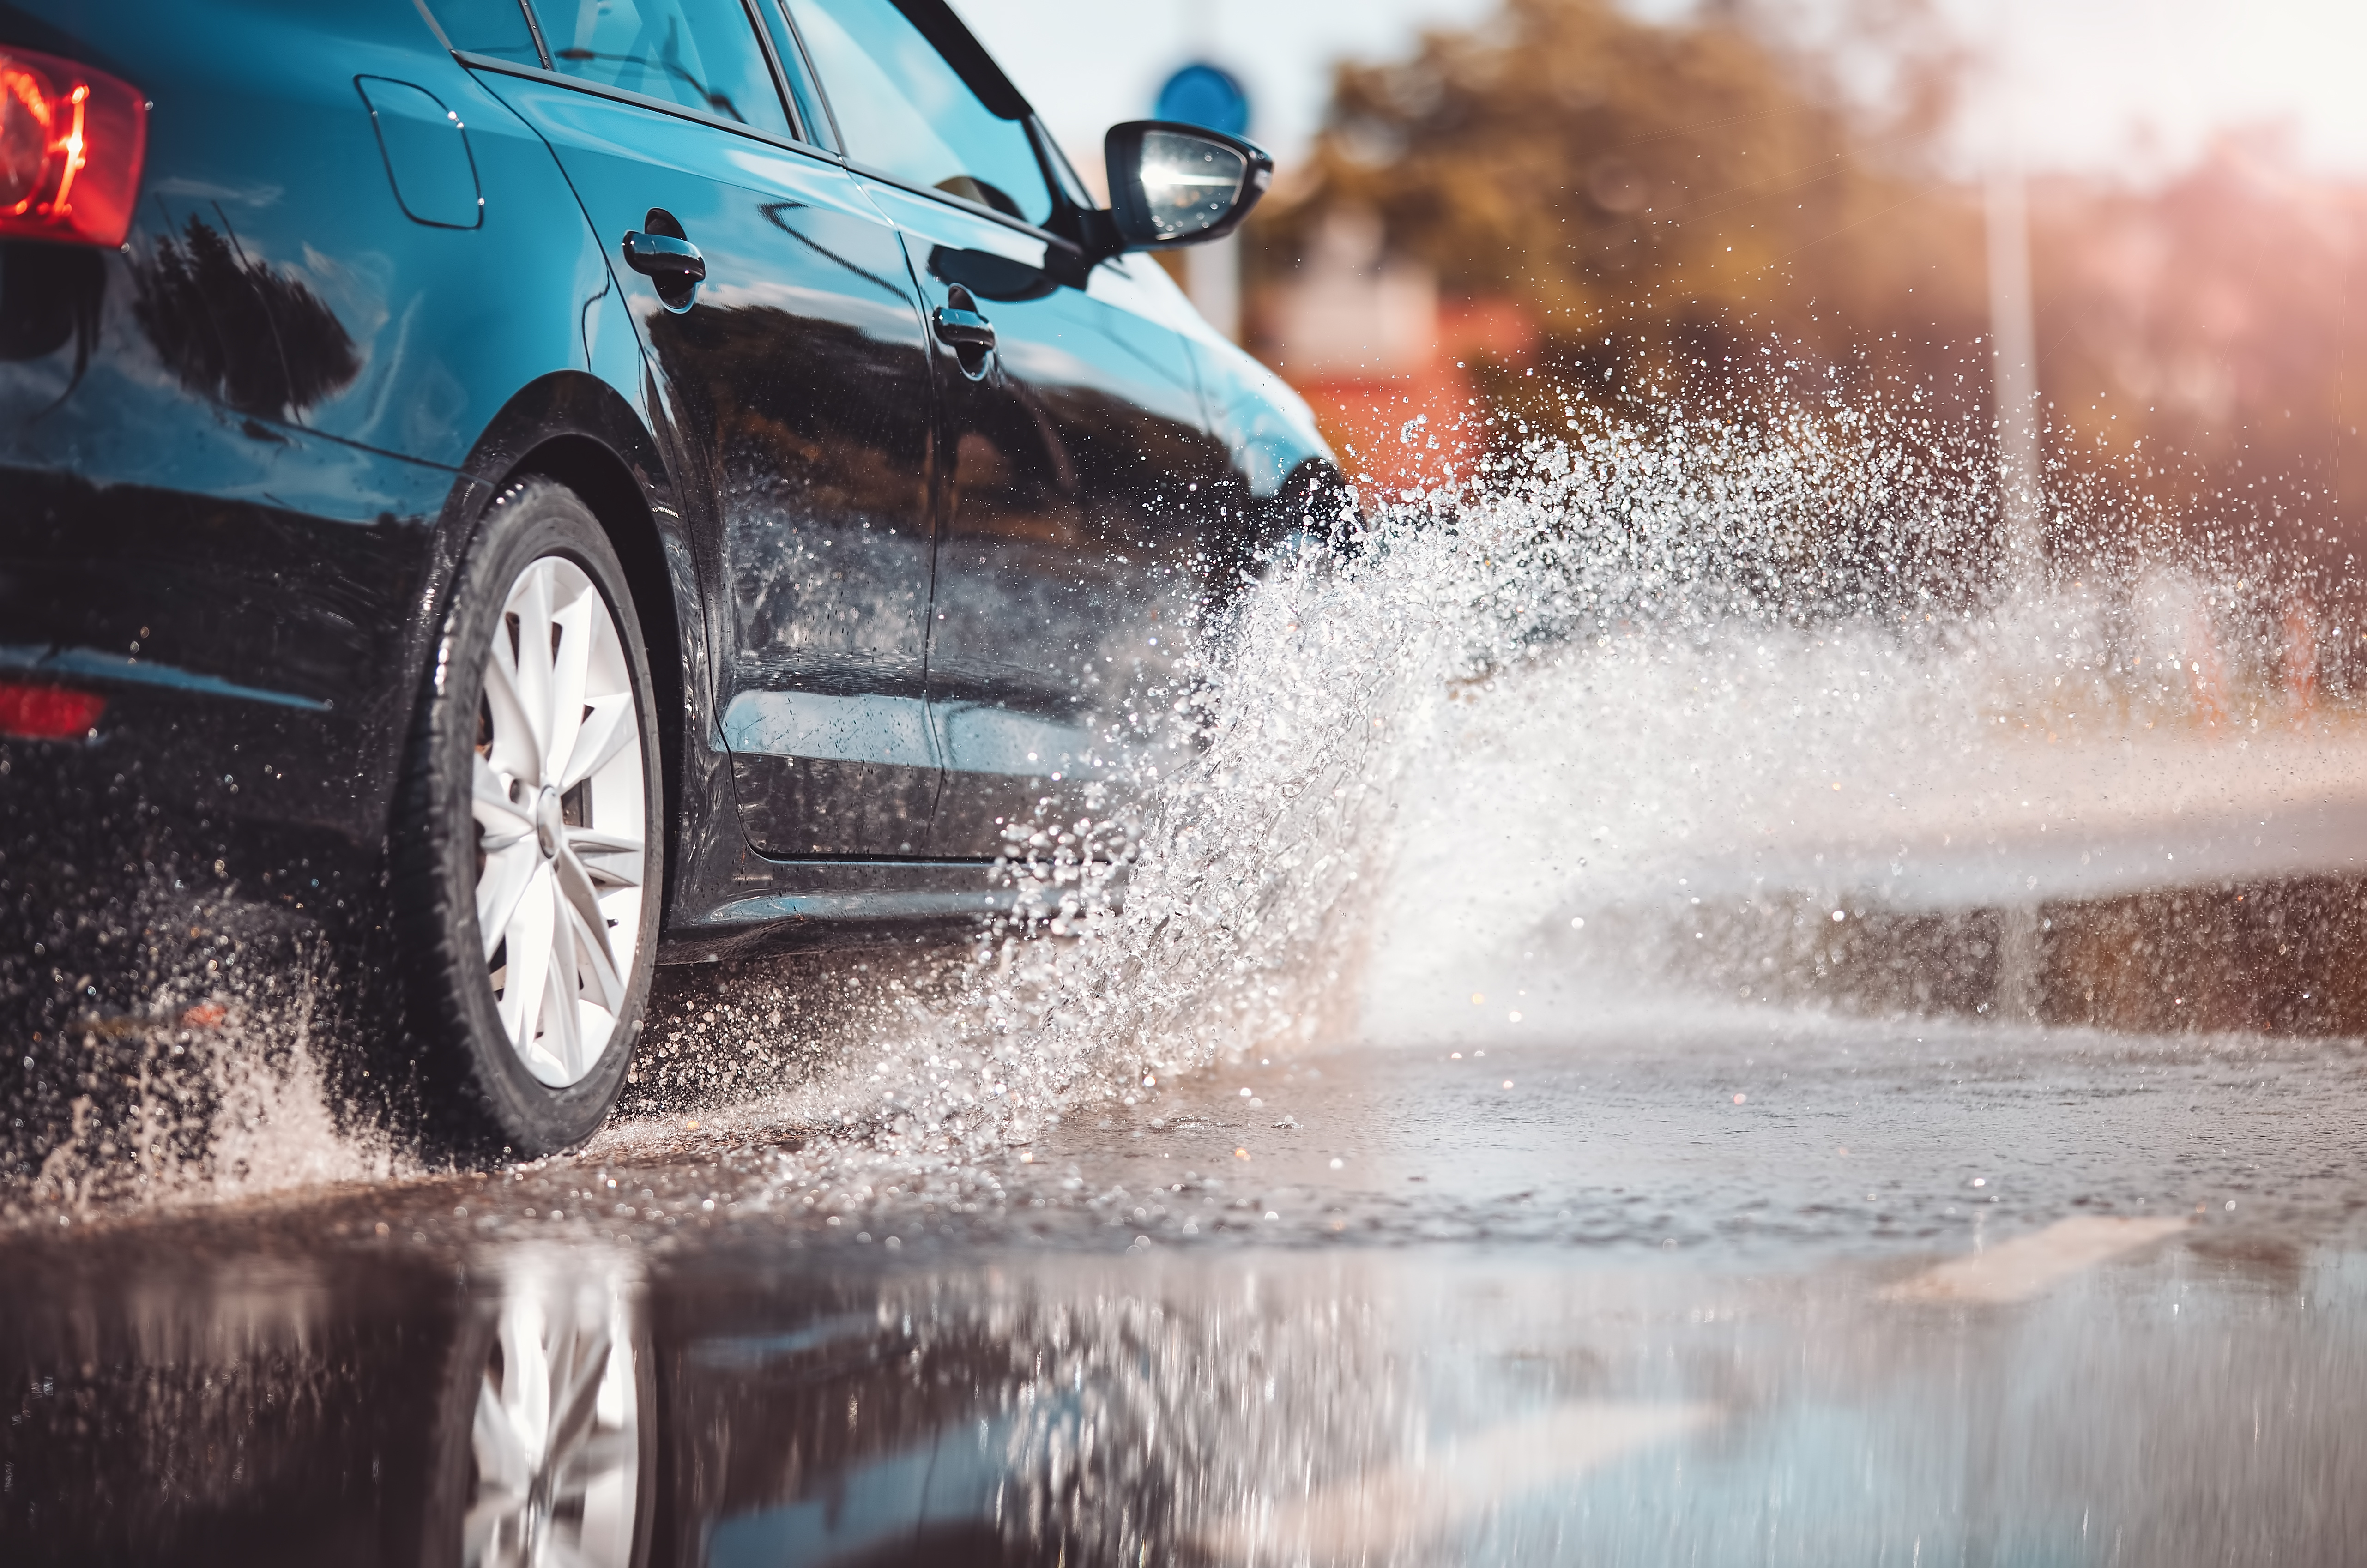 Navigate Wet Roads Safely and Avoid Aquaplaning